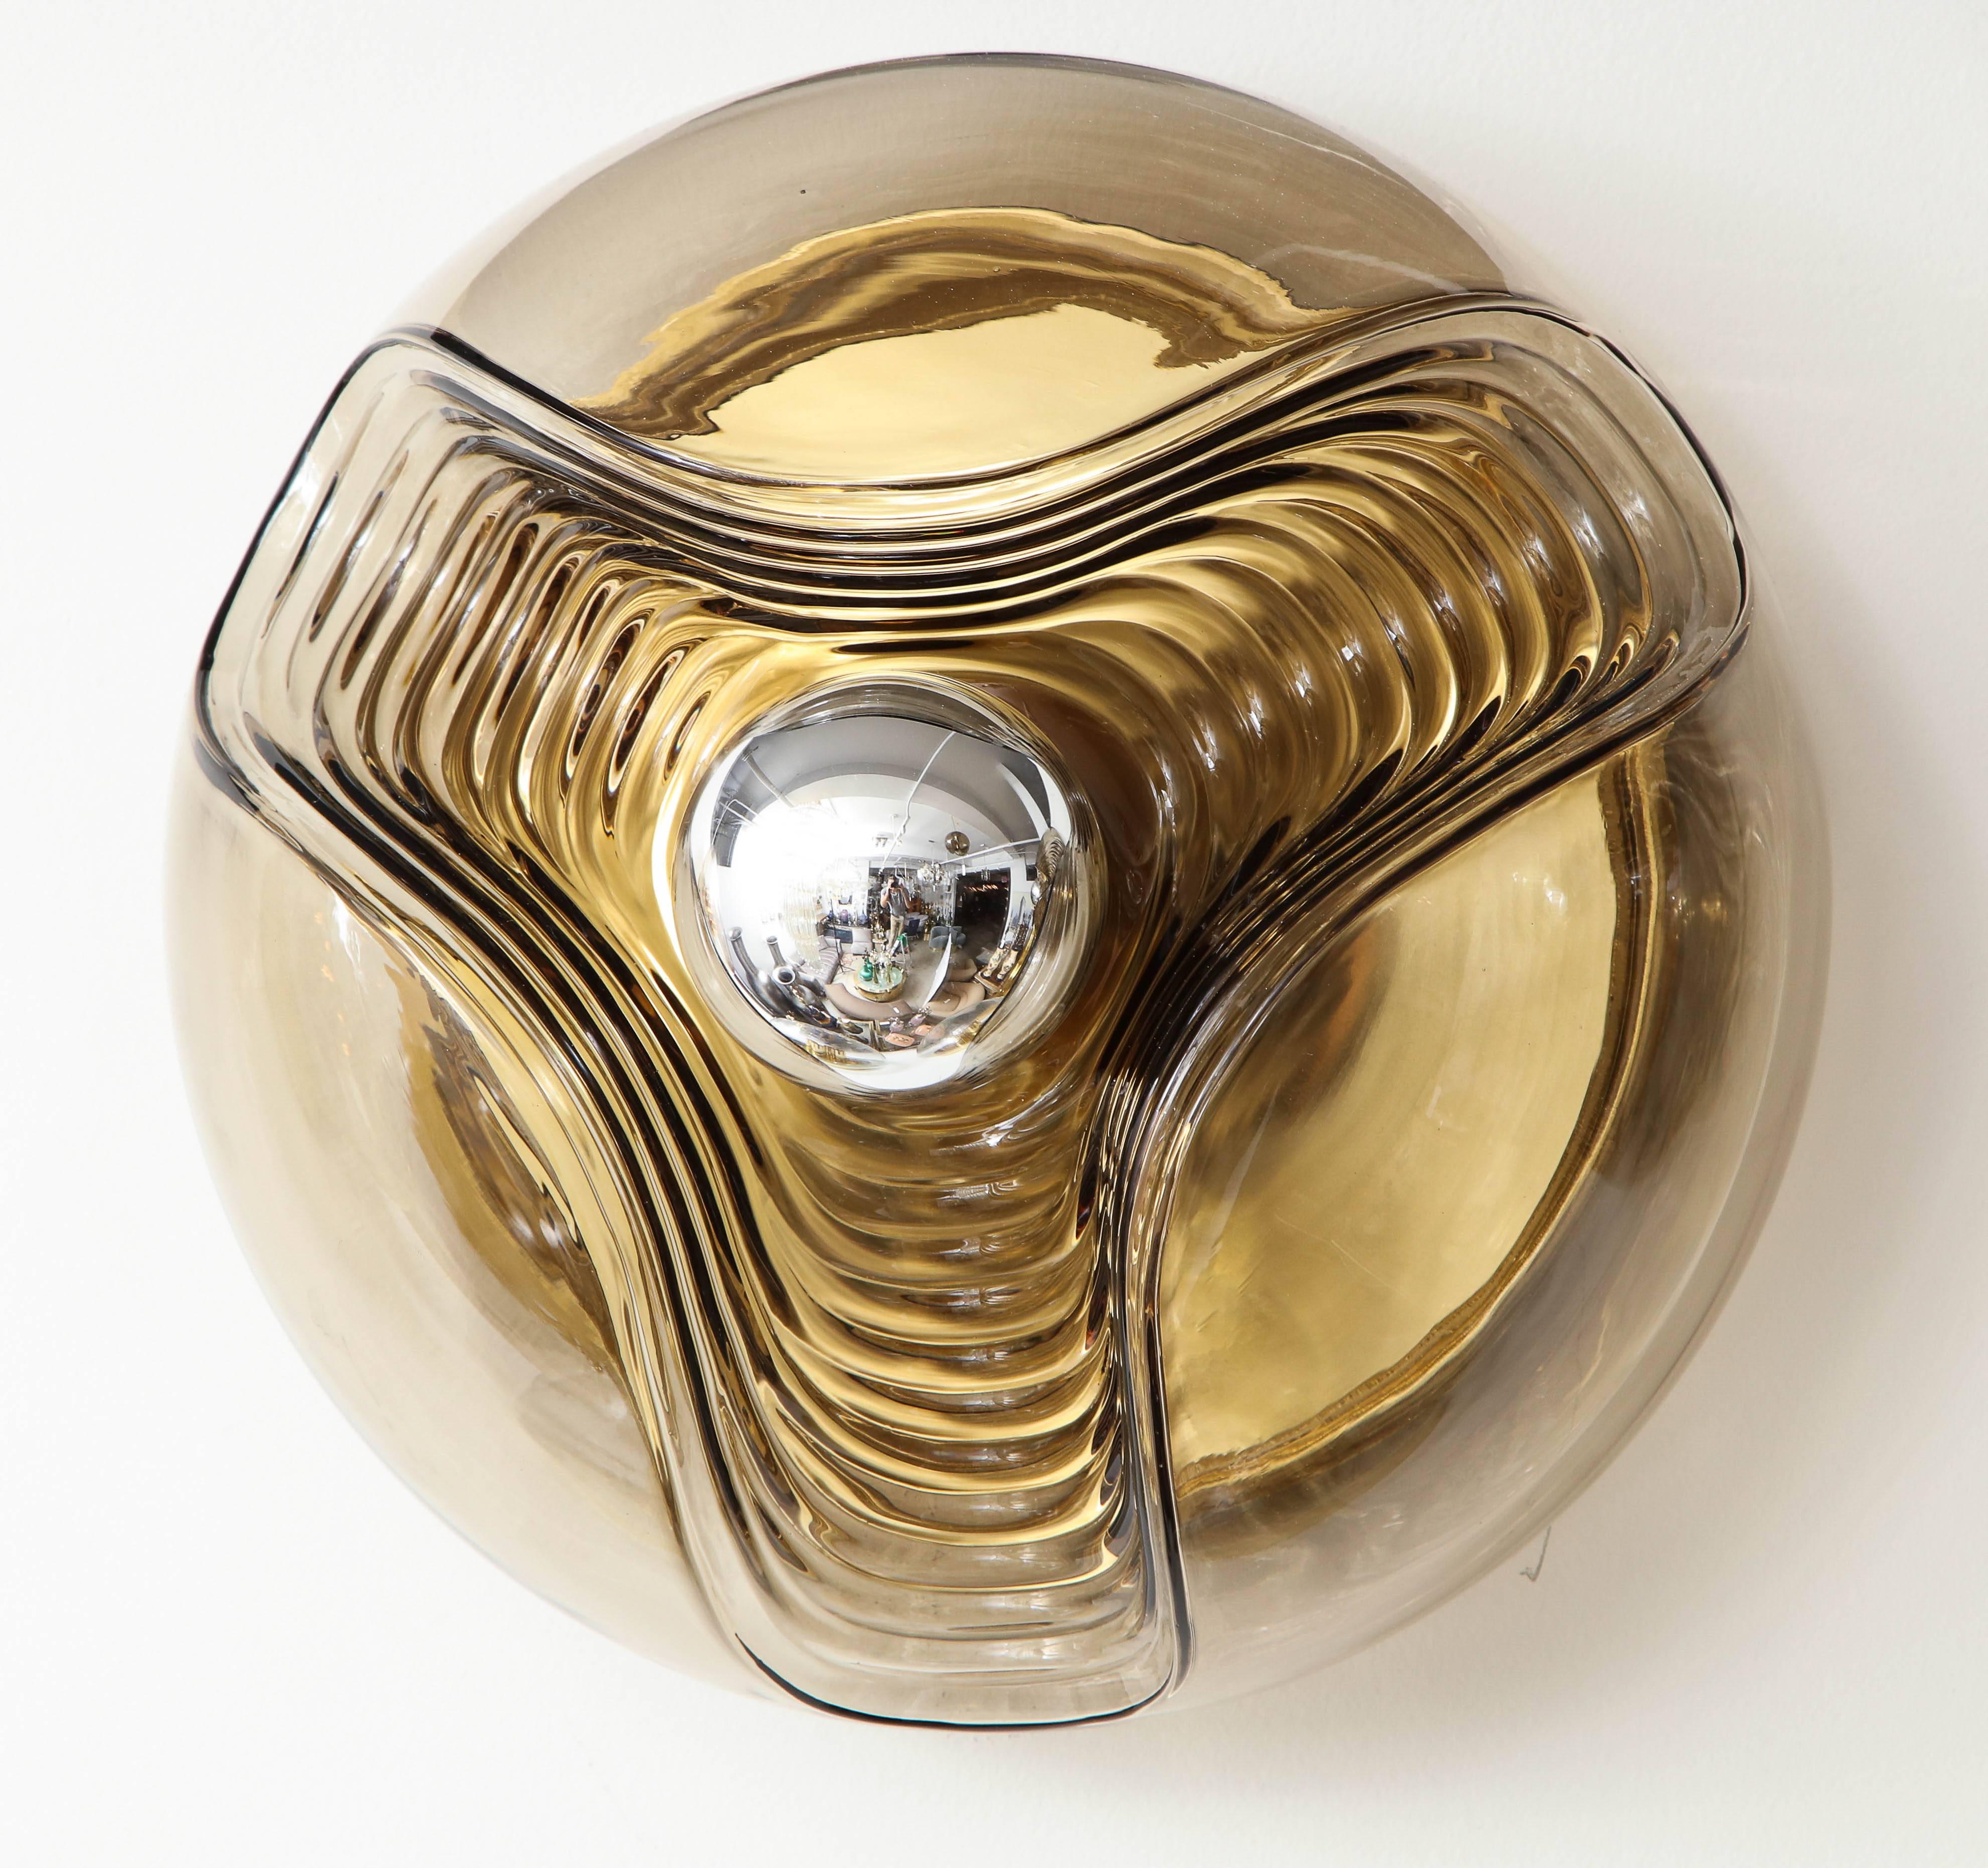 1970s, Mid-century sconce / flush mount by Koch & Lowy for Peill & Putzler.
This large smoked wave form glass shade is supported by a brass plate with a single centre light bulb.
The fixture has been newly rewired for the US and takes a